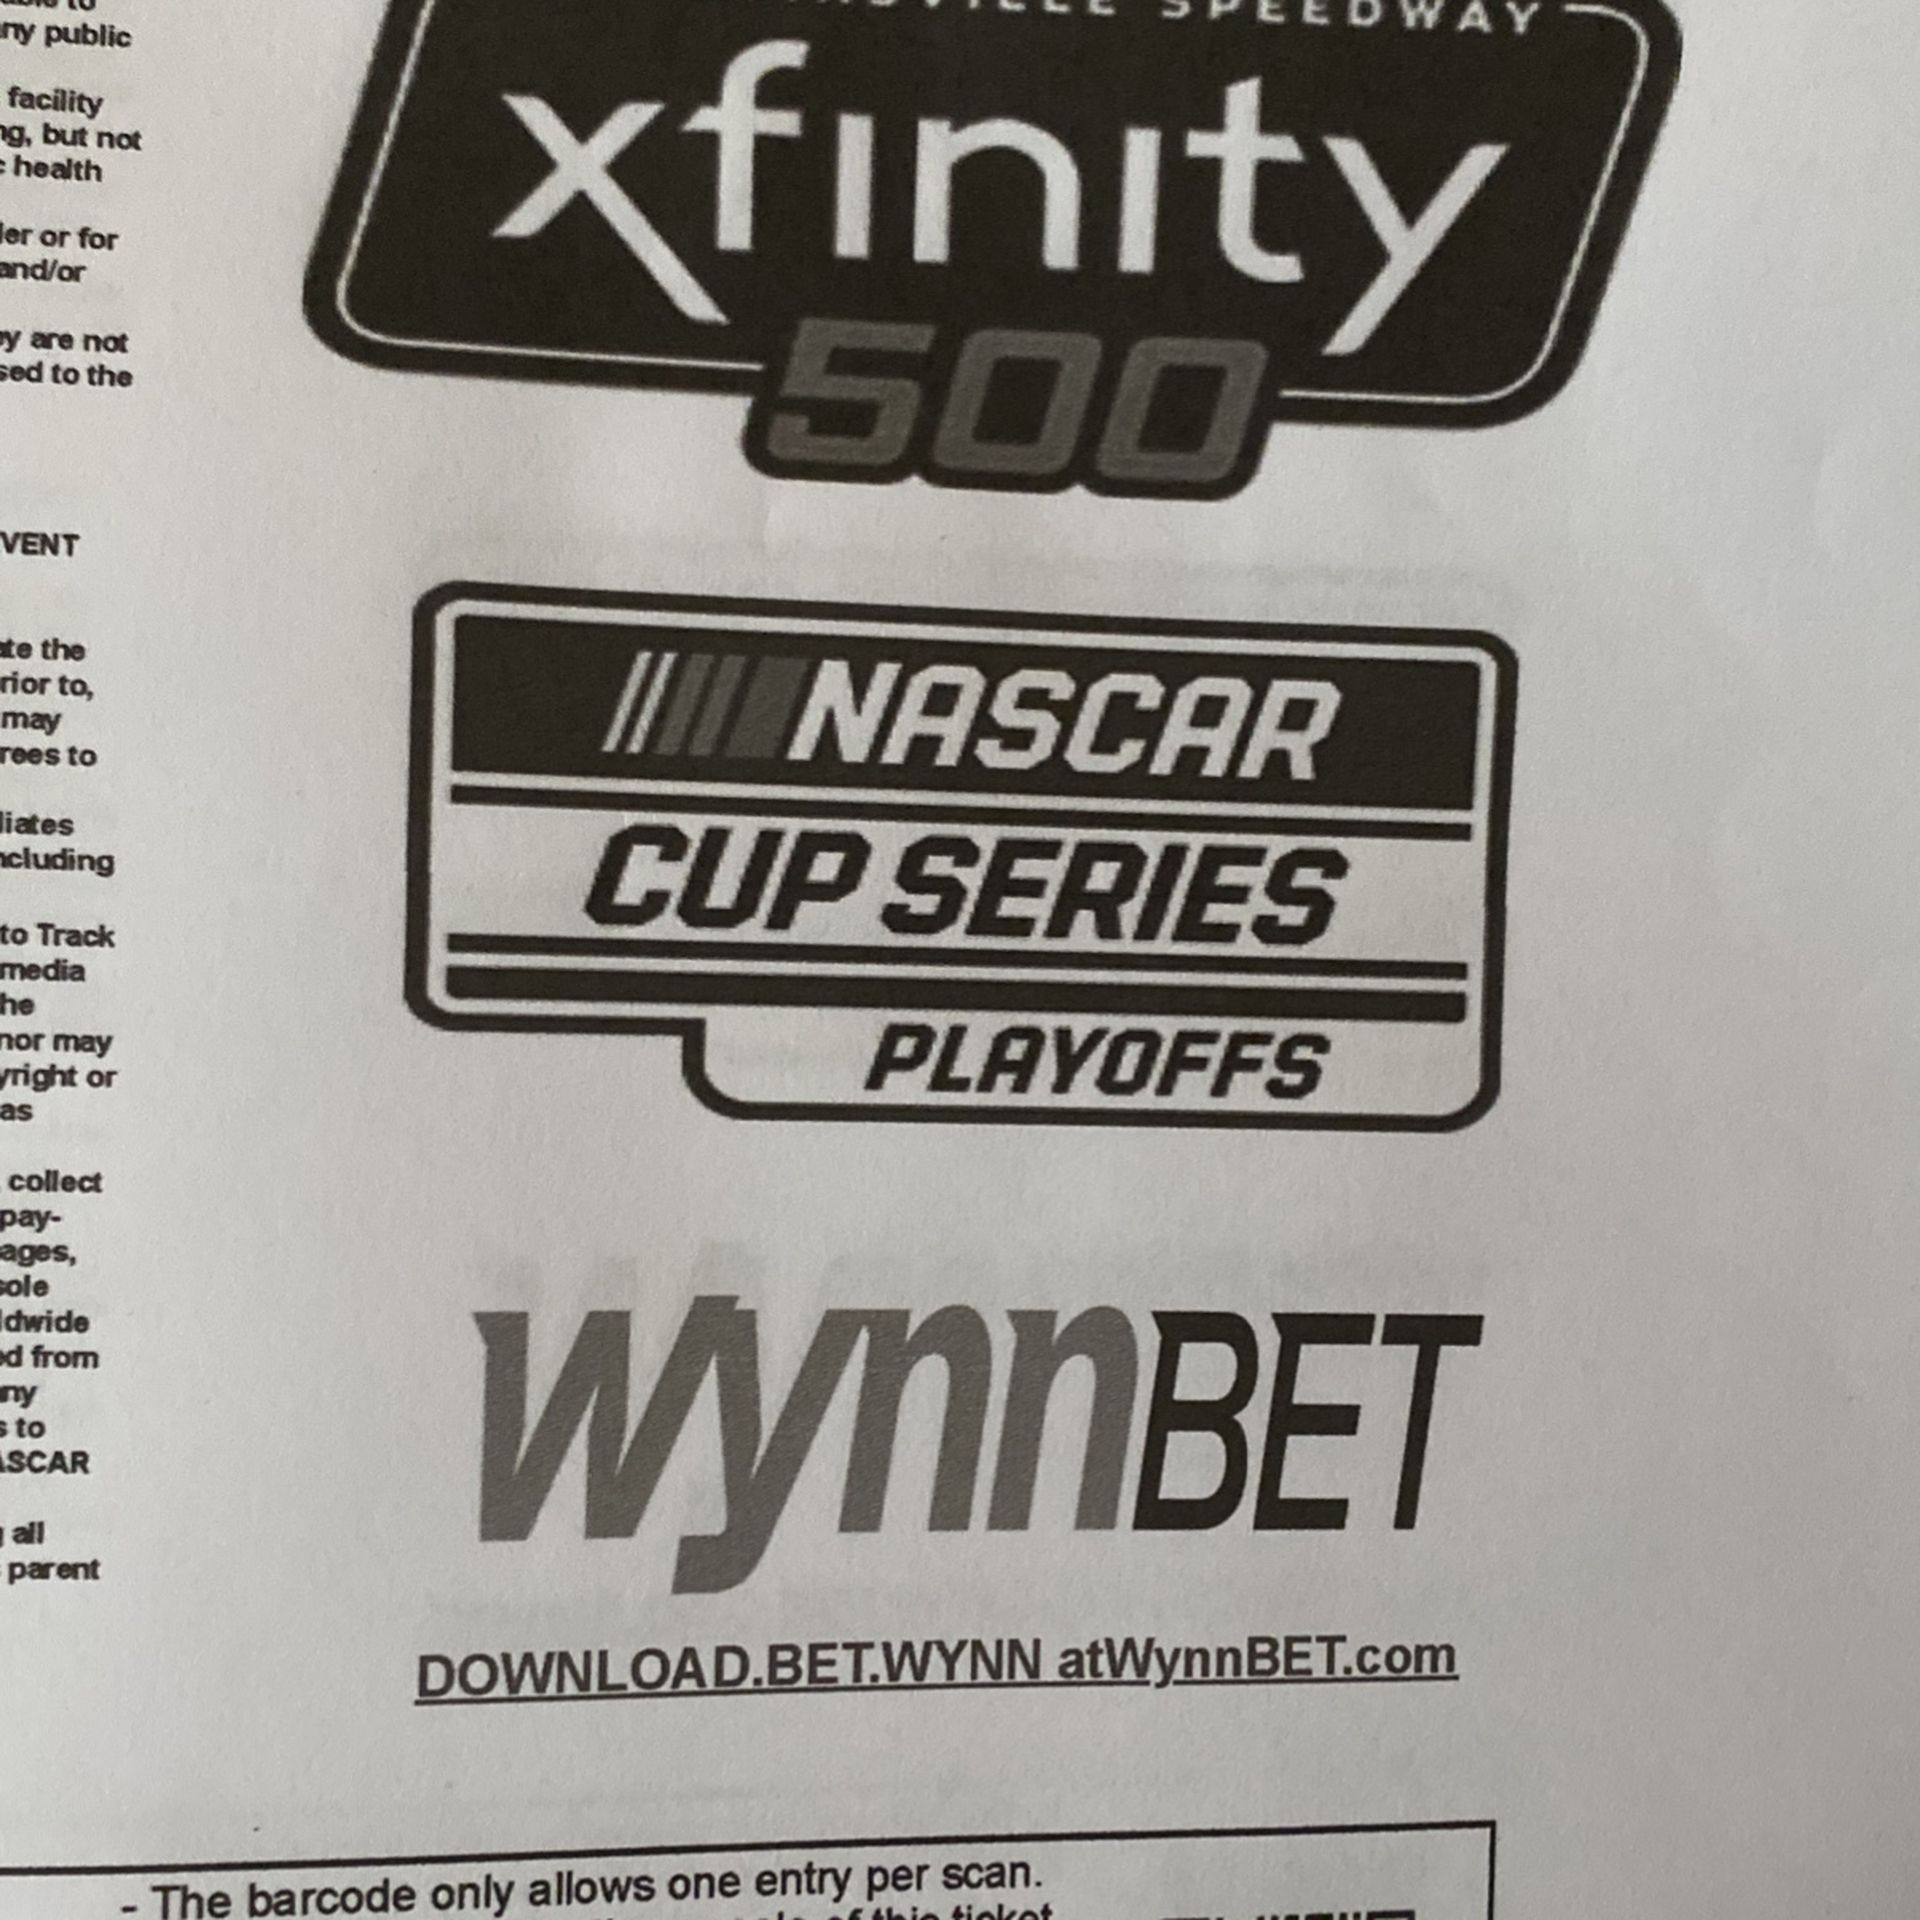 Tickets To The Martinsville nascar race Oct 31st